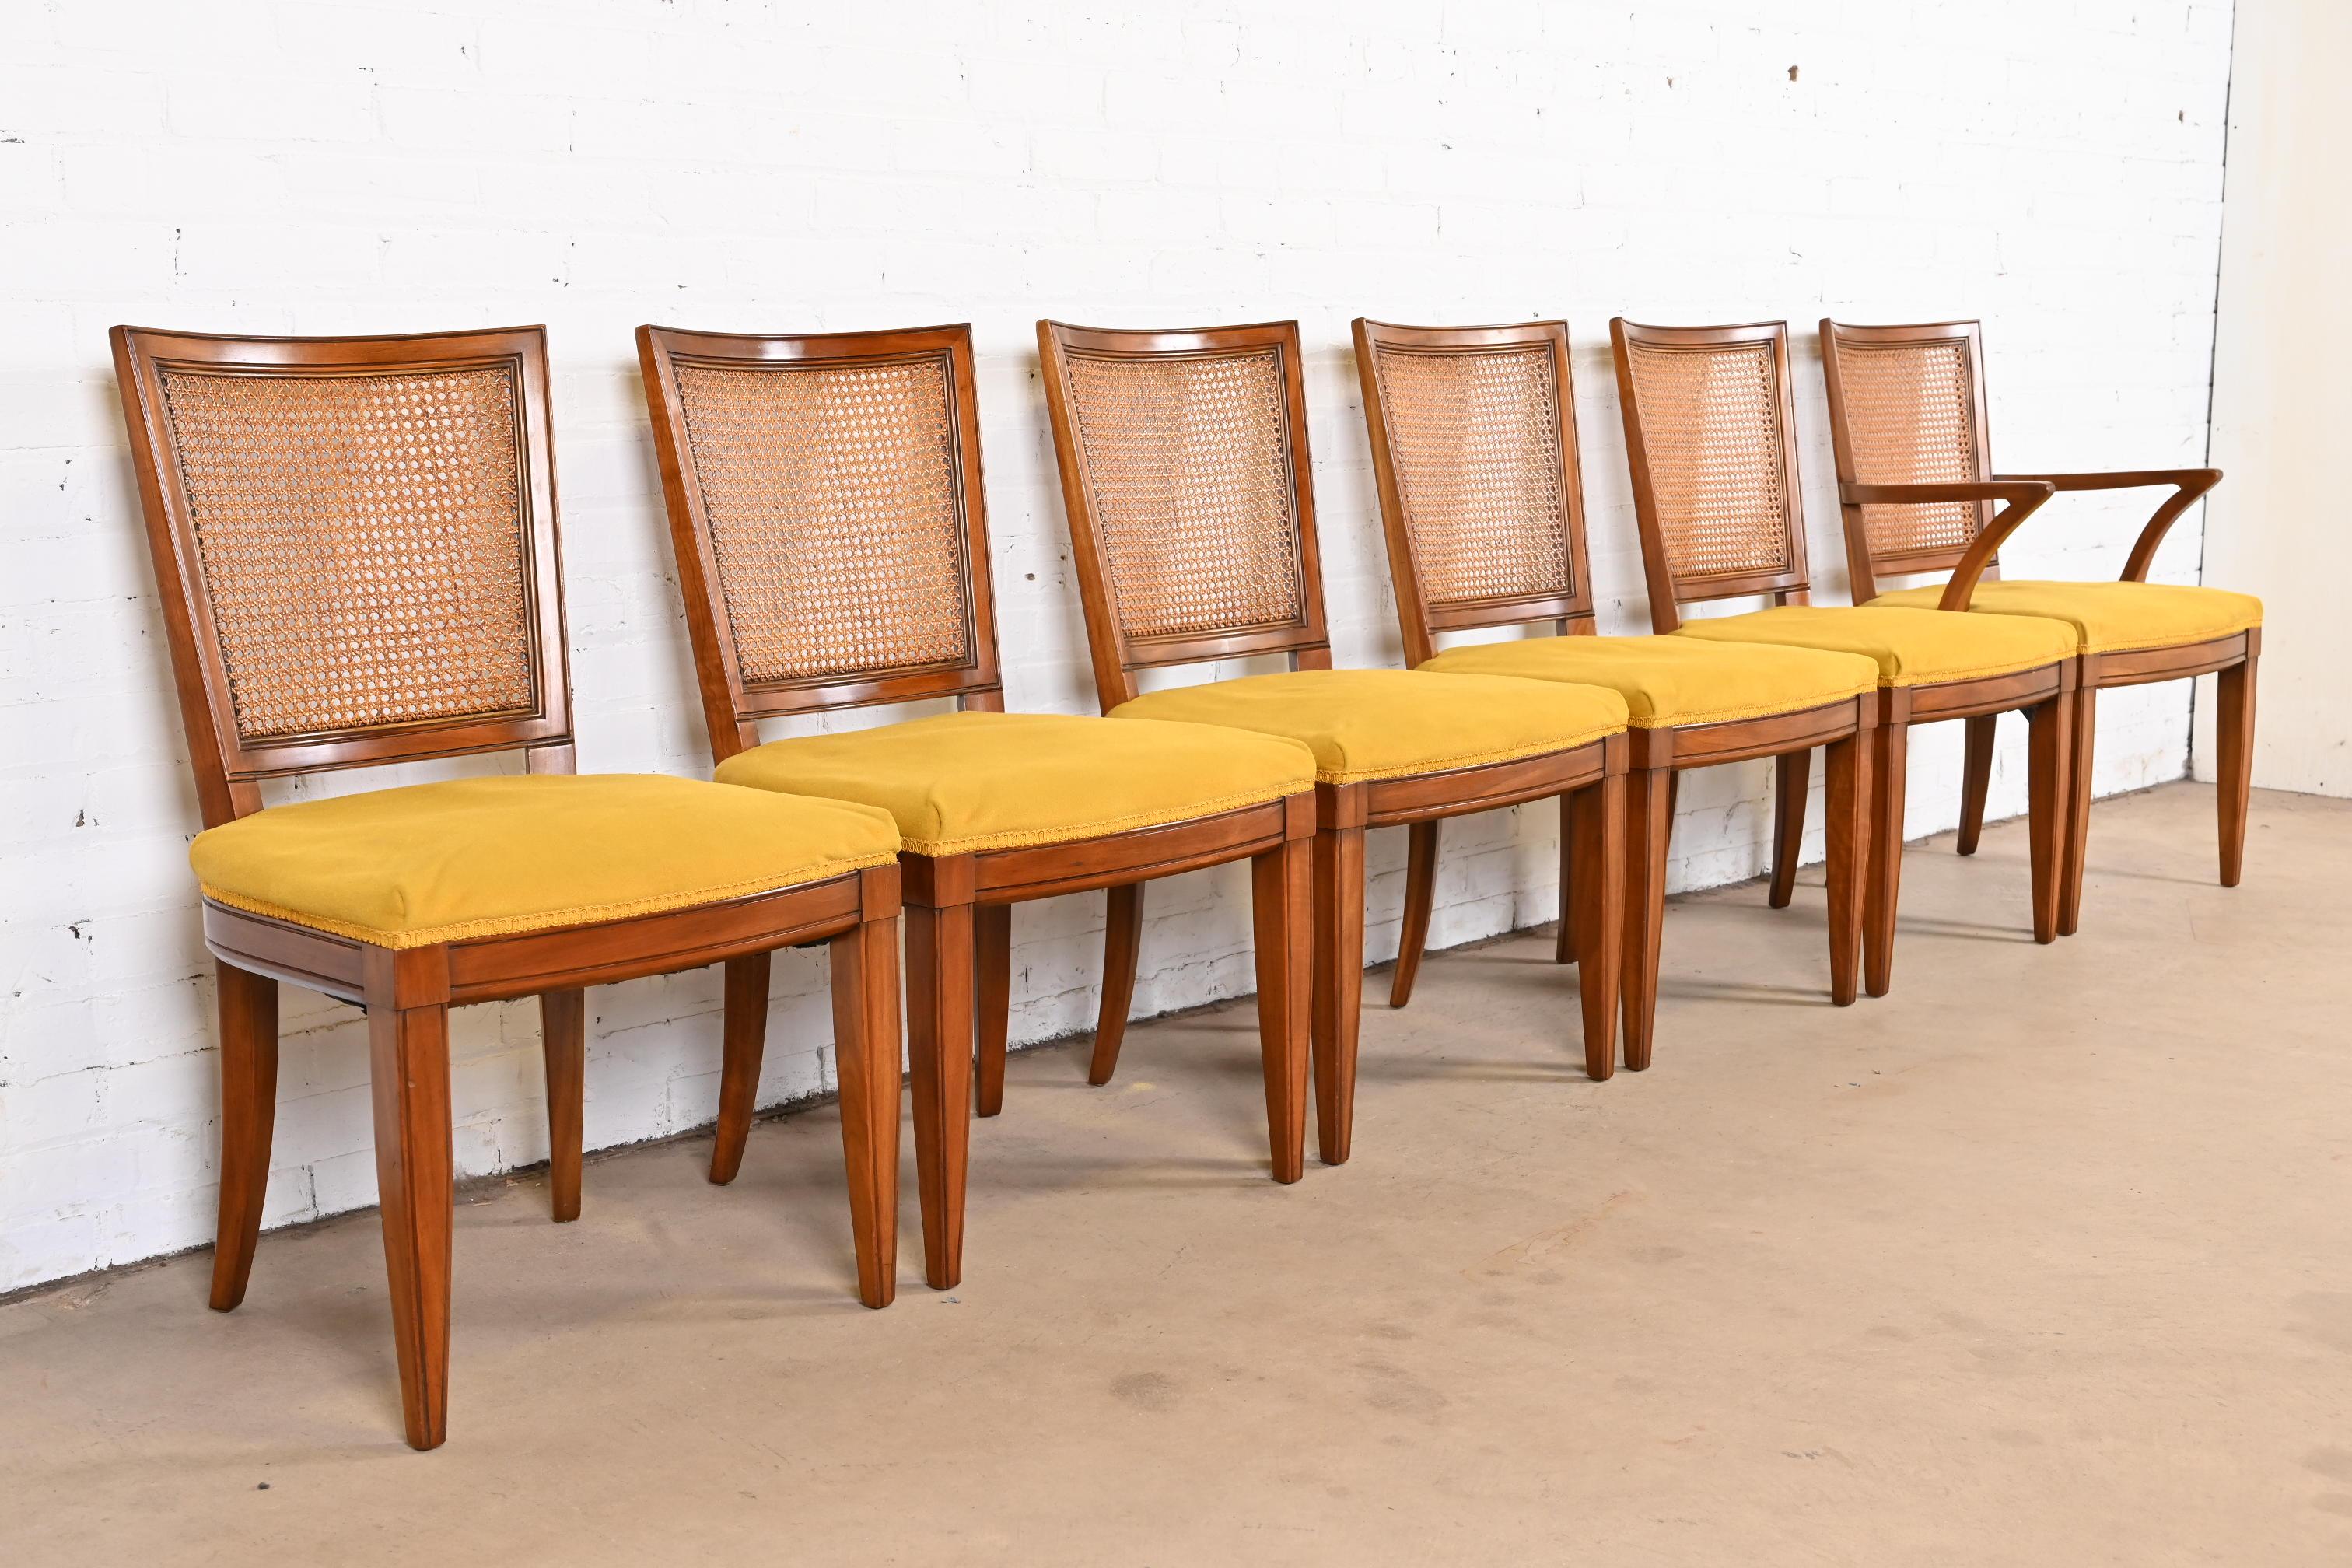 Mid-20th Century Kindel Furniture Midcentury French Regency Cherry Wood and Cane Dining Chairs